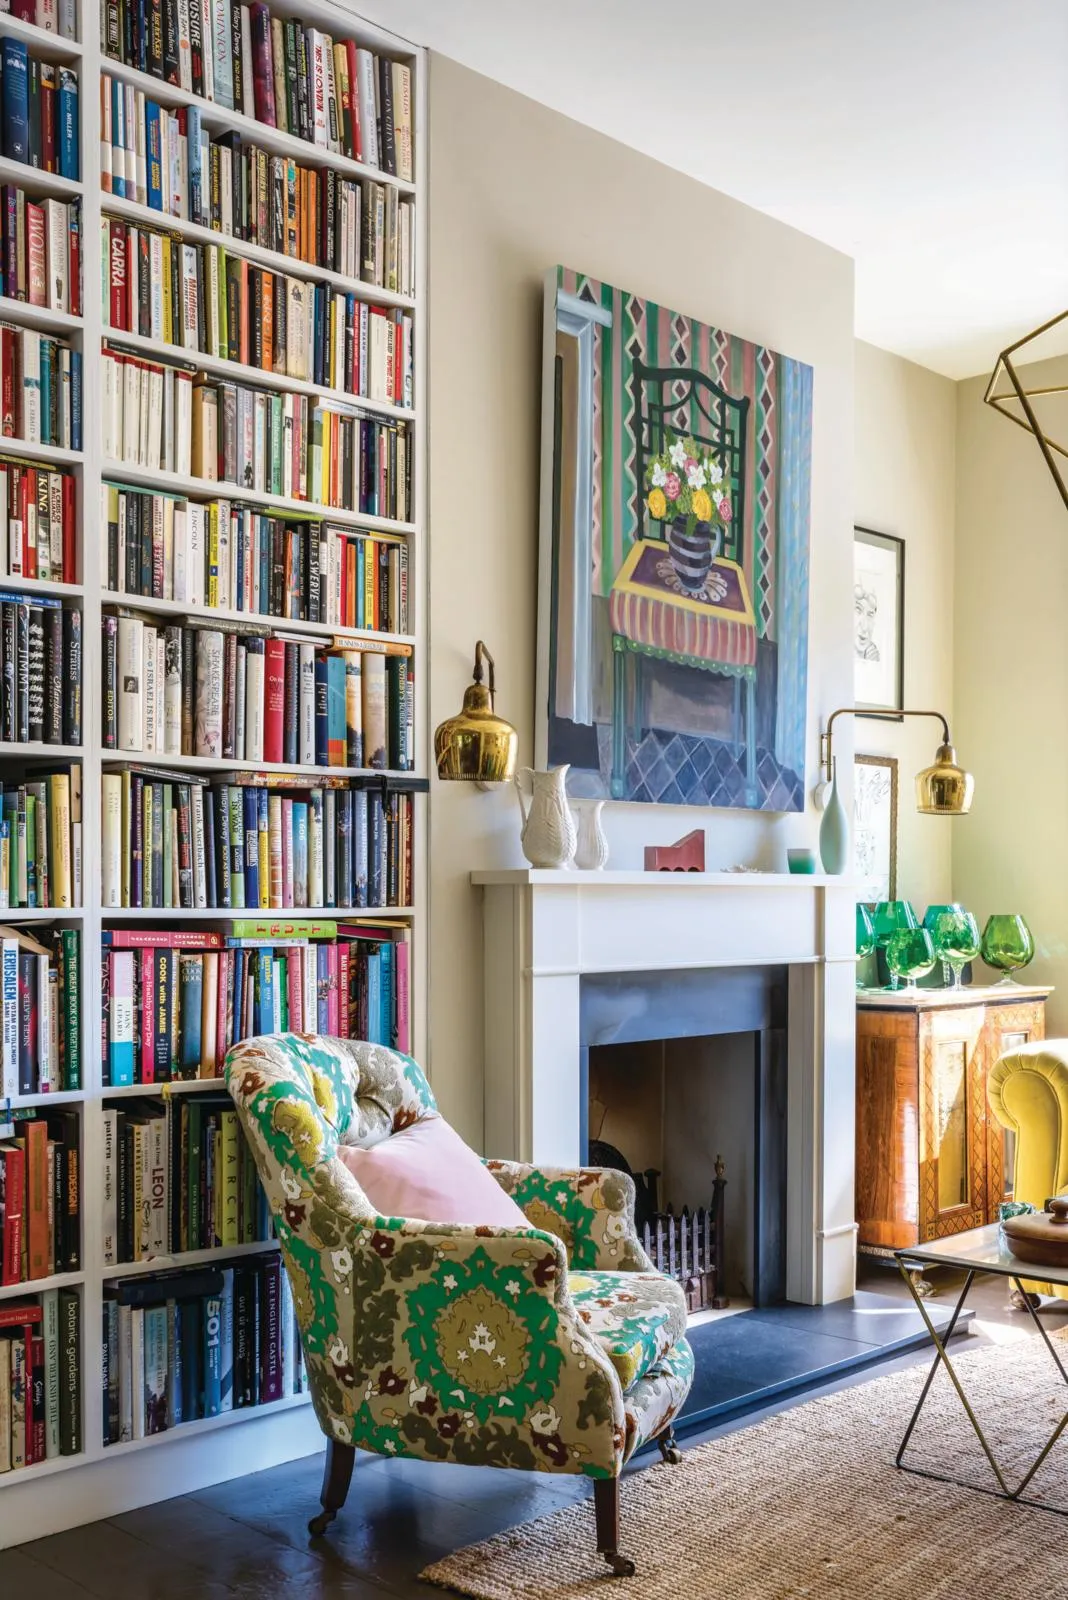 Victorian terrace filled with heirlooms